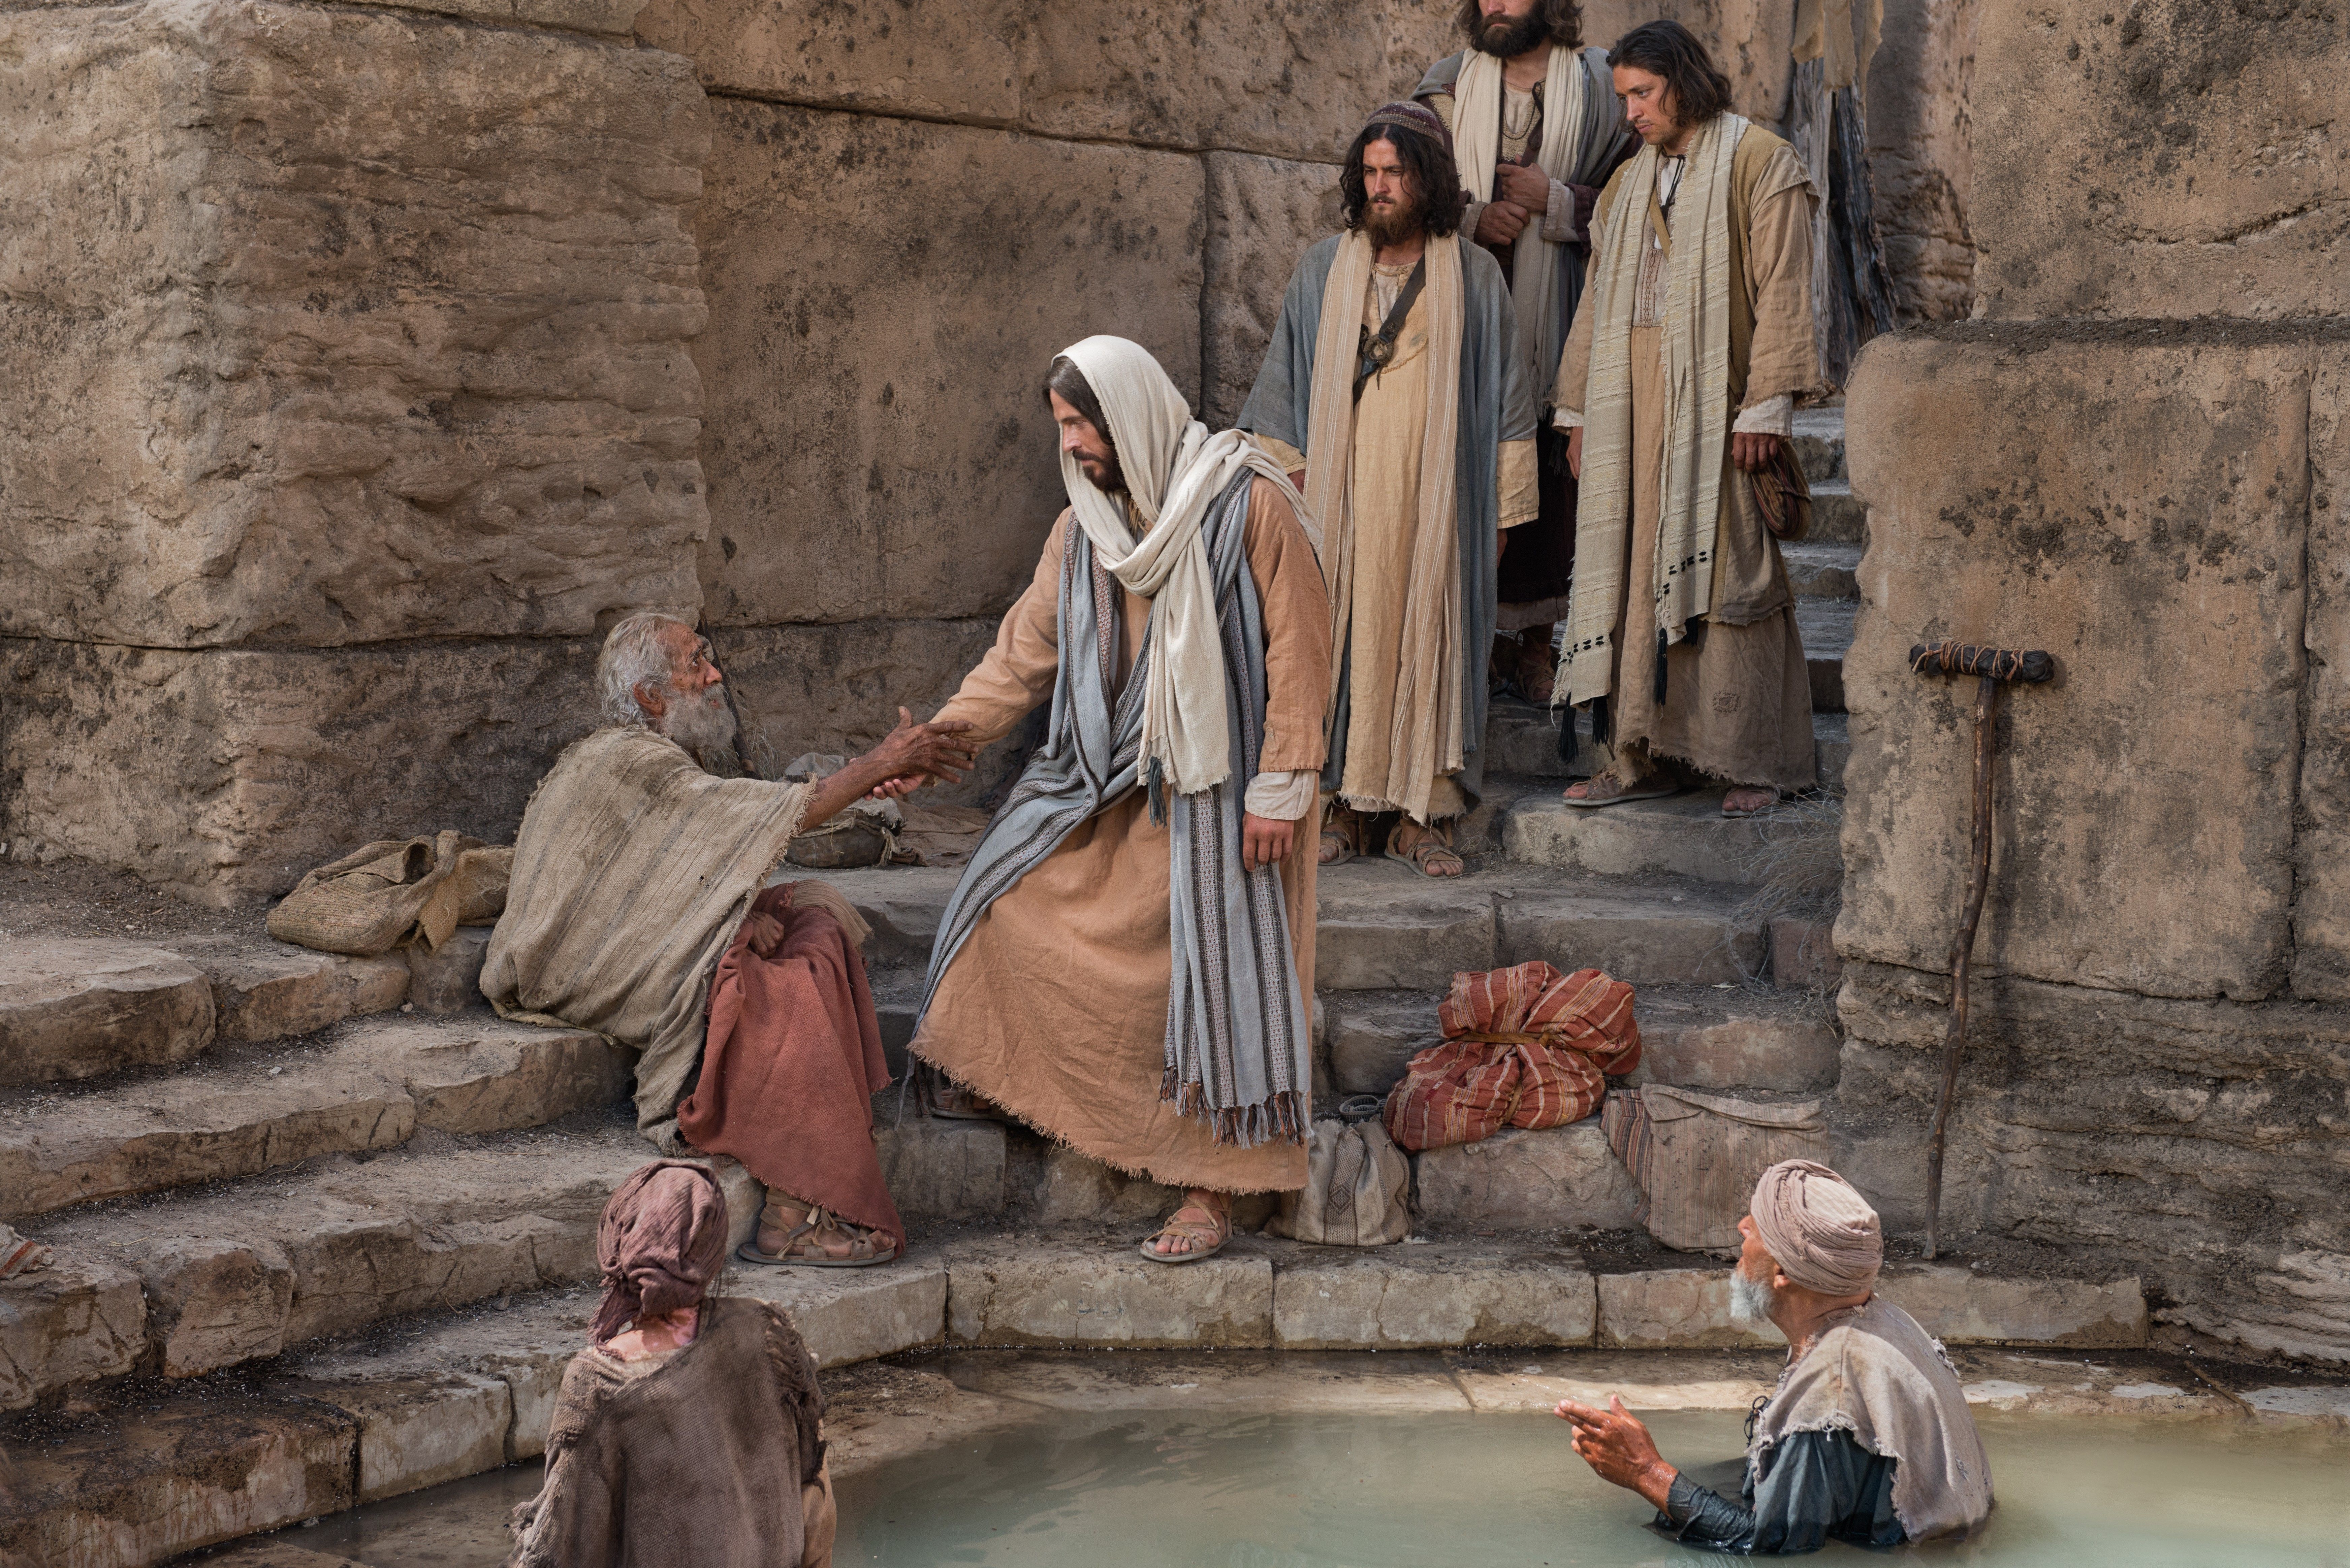 Christ at the pool of Bethesda, reaching toward the man waiting there.